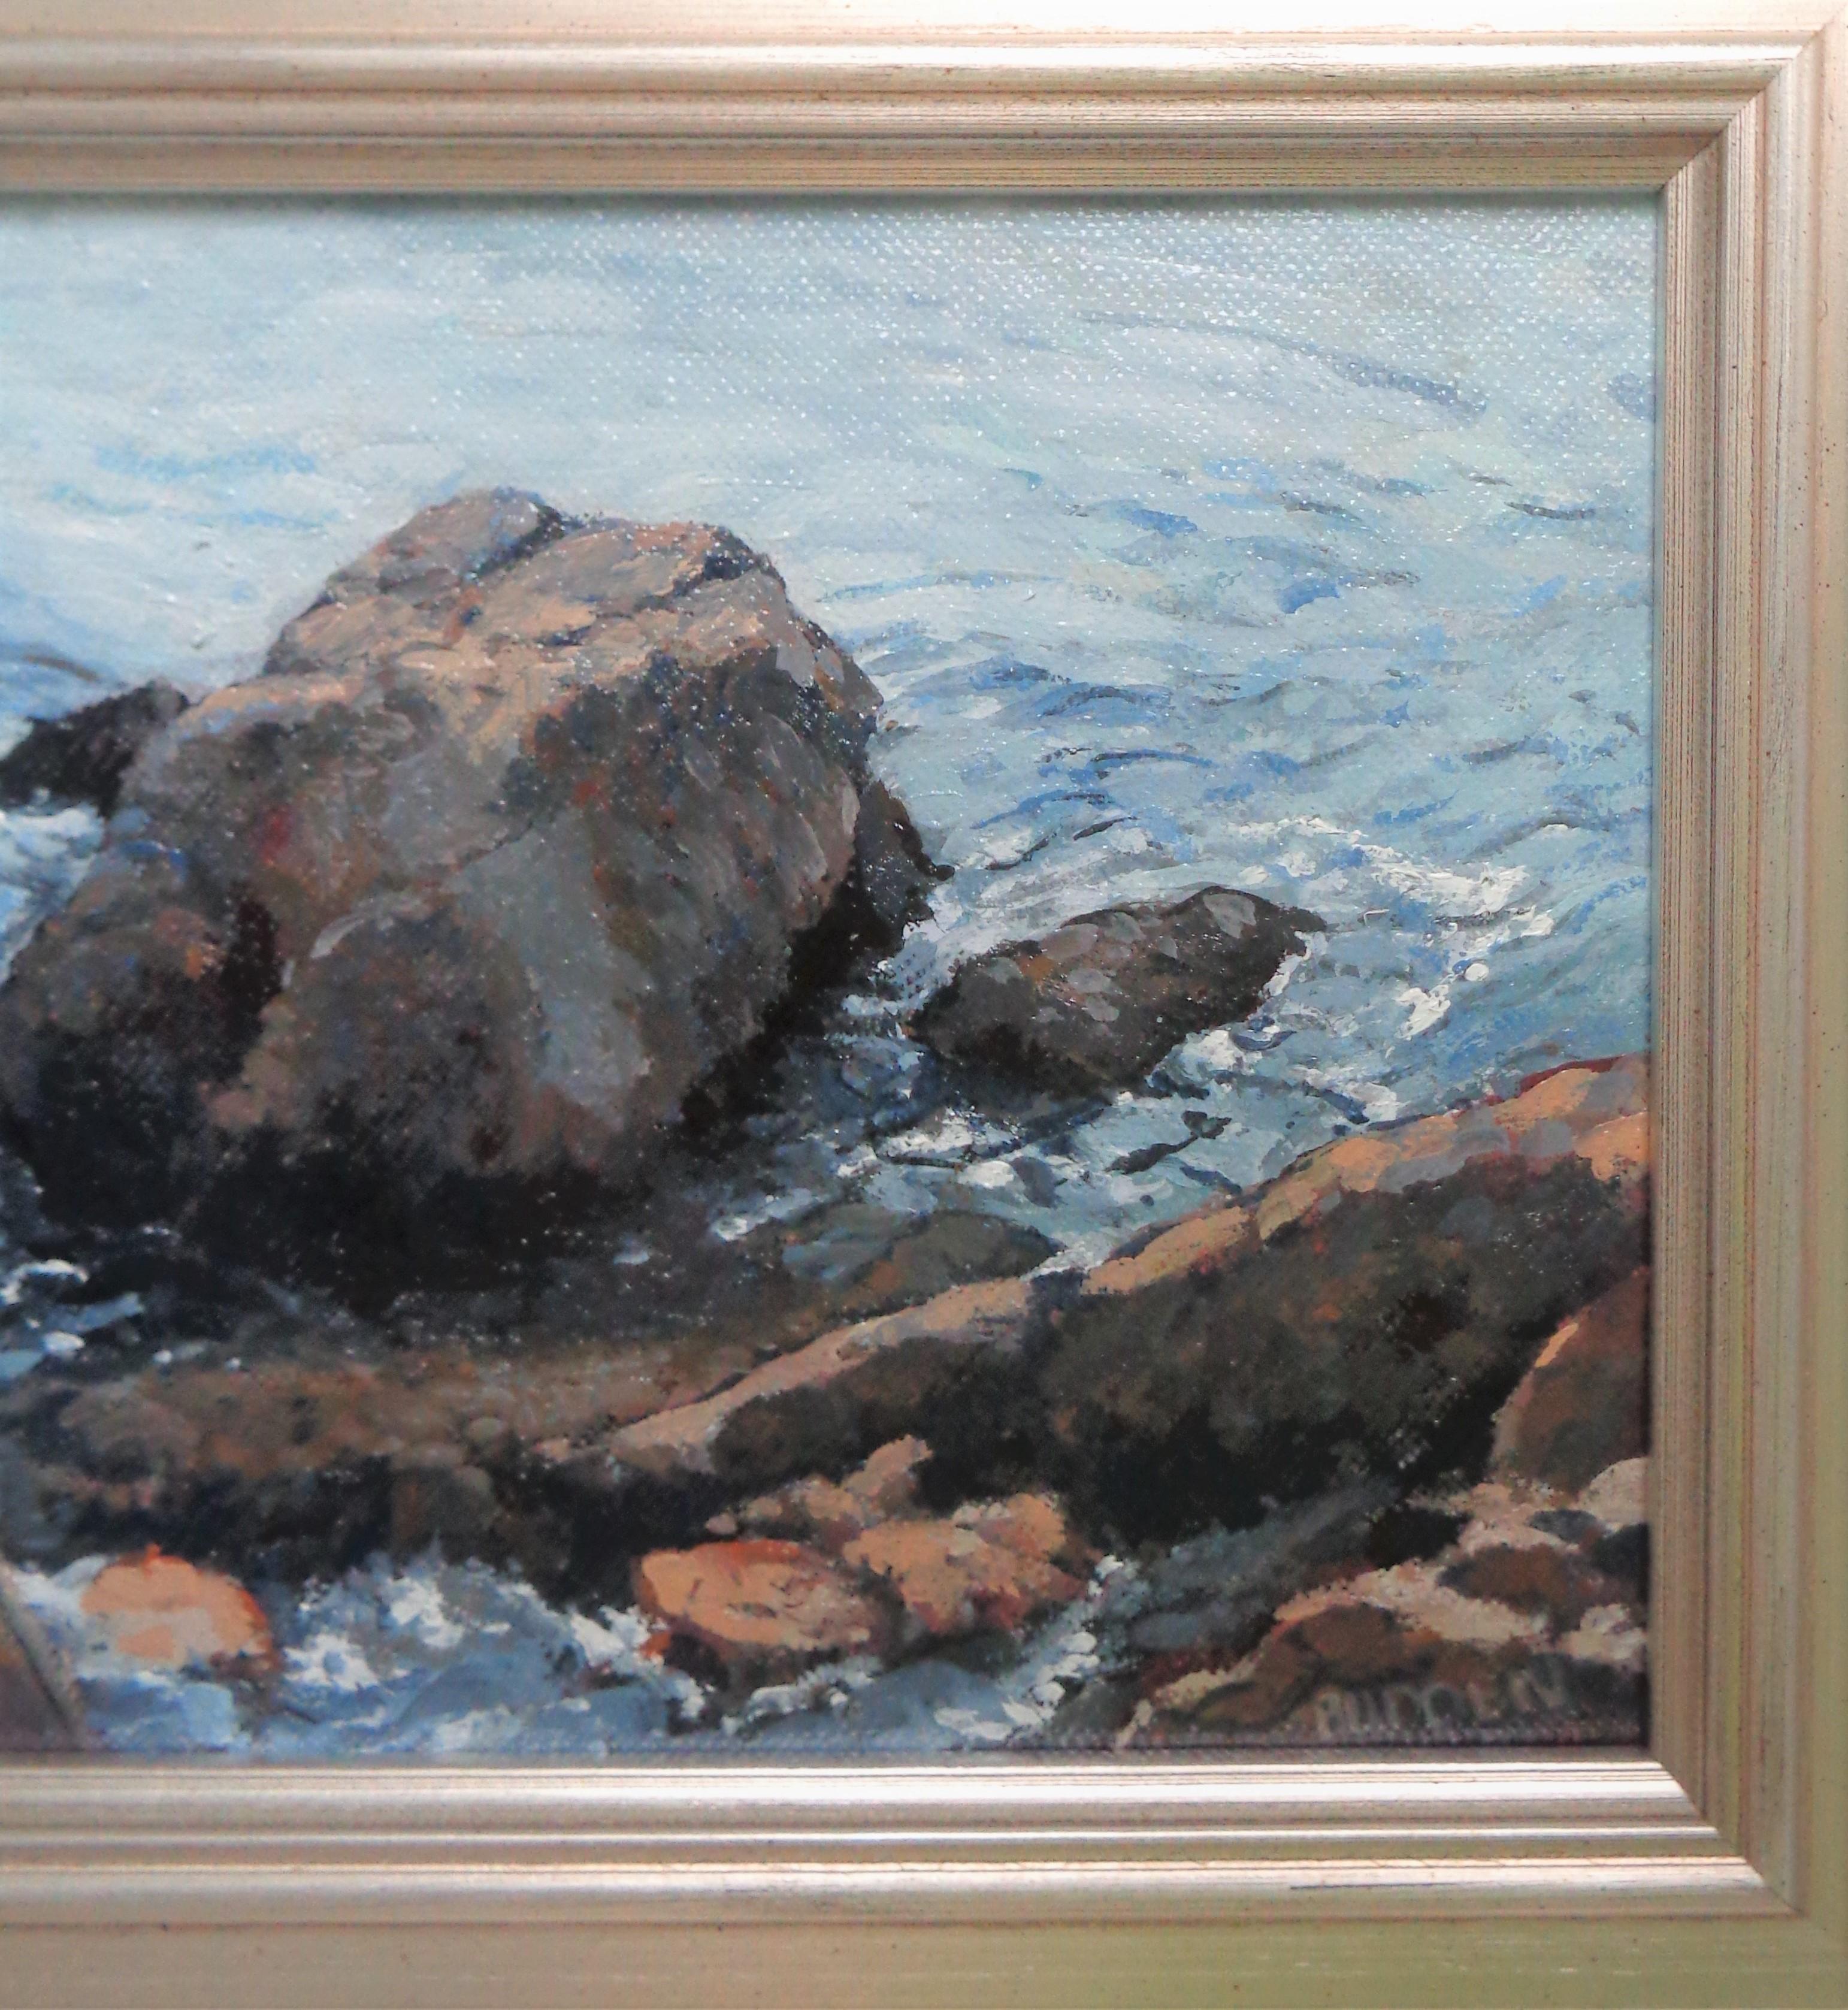 Impressionistic Seascape Ocean Painting Michael Budden Rocks and Water Study 2